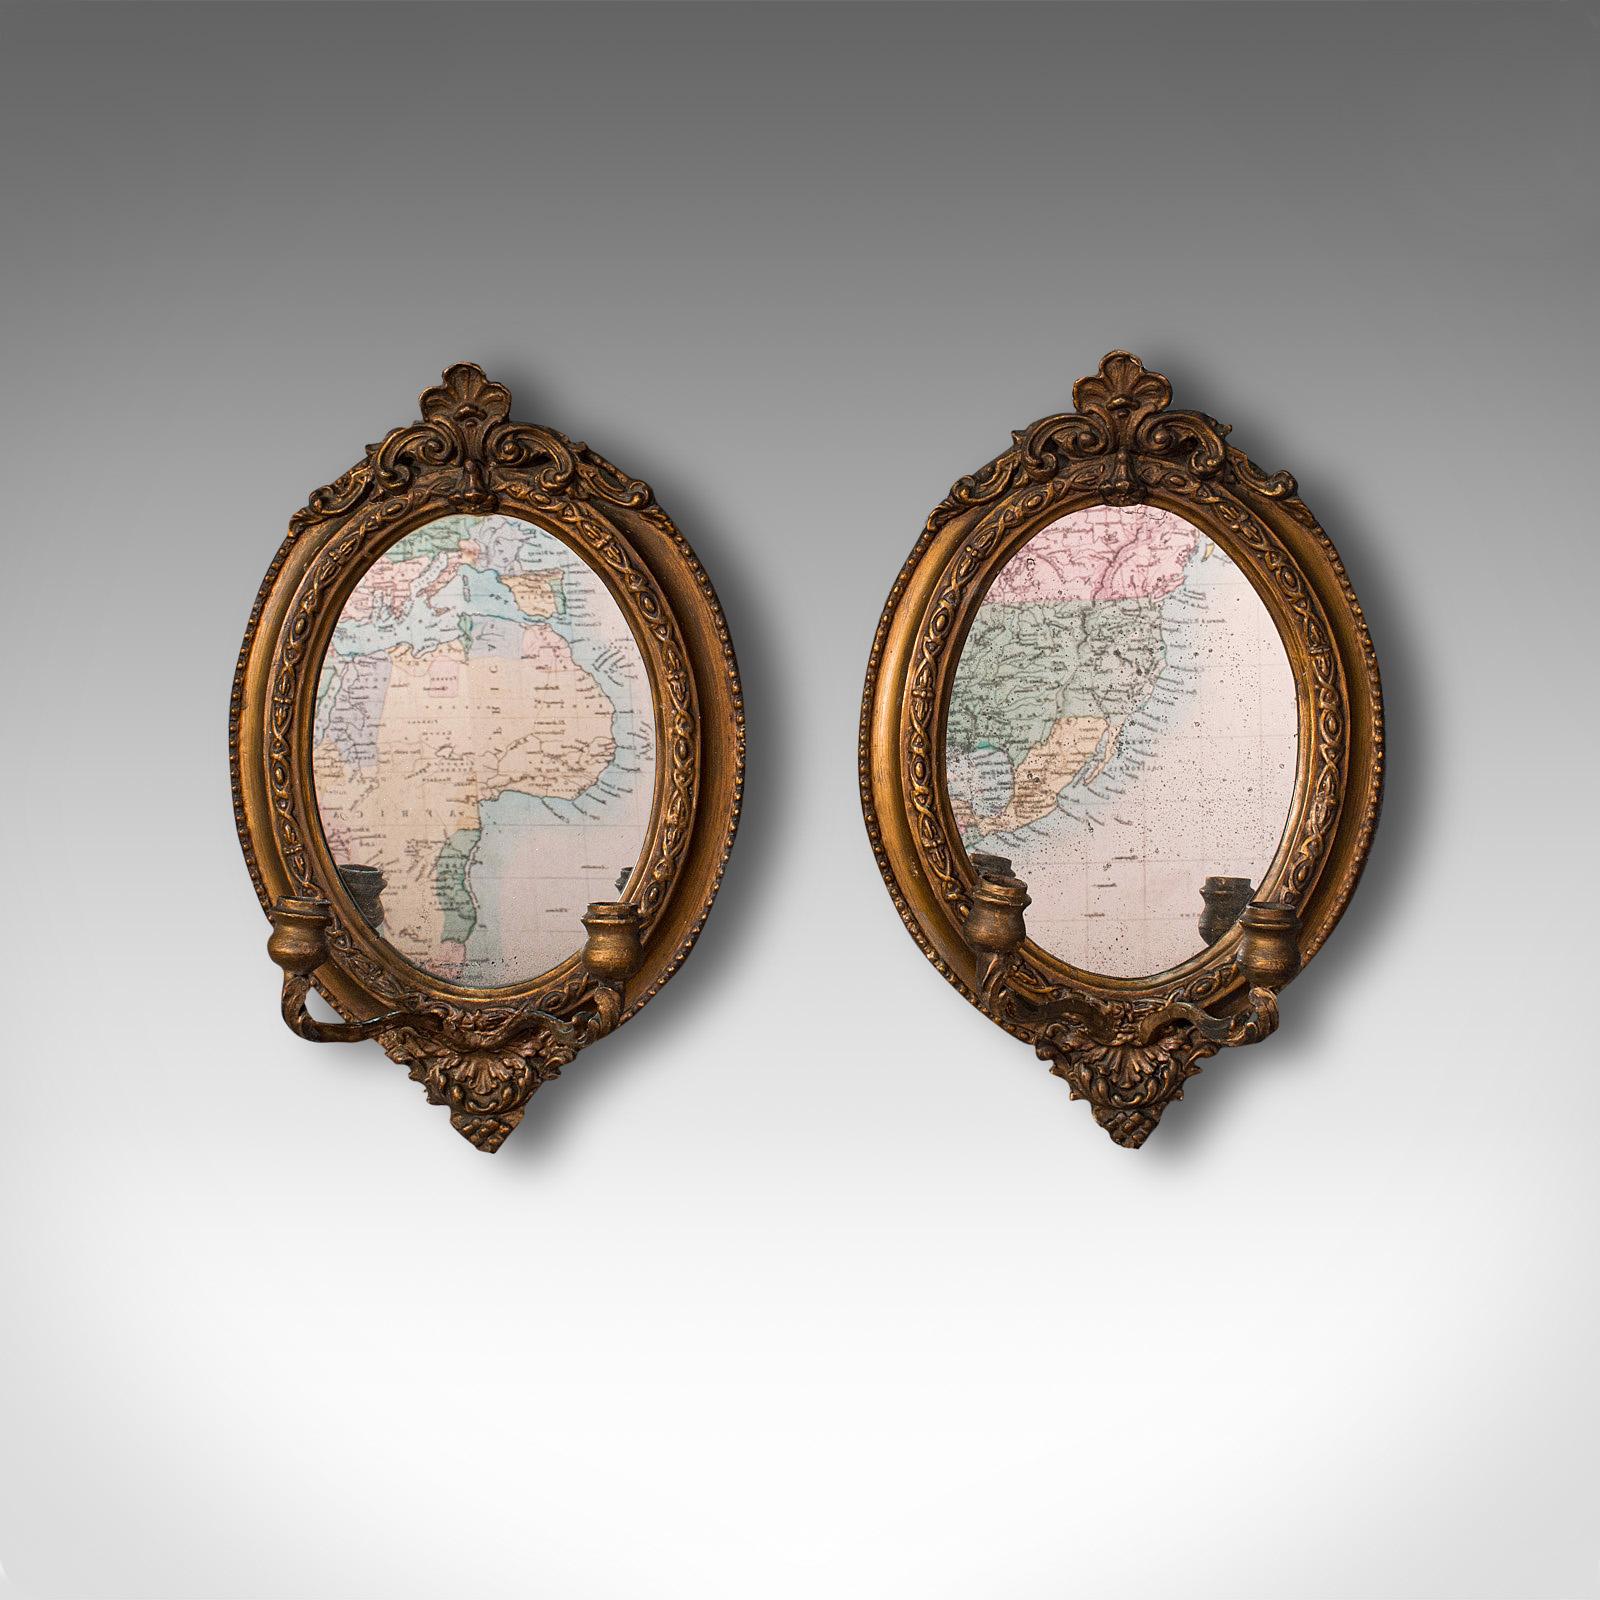 This is a delightful pair of antique girandole mirrors. An English, giltwood oval wall mirror with mercury plates, dating to the Regency period, circa 1820.

Striking examples offering warm colour and superb Regency taste
Displaying a desirable